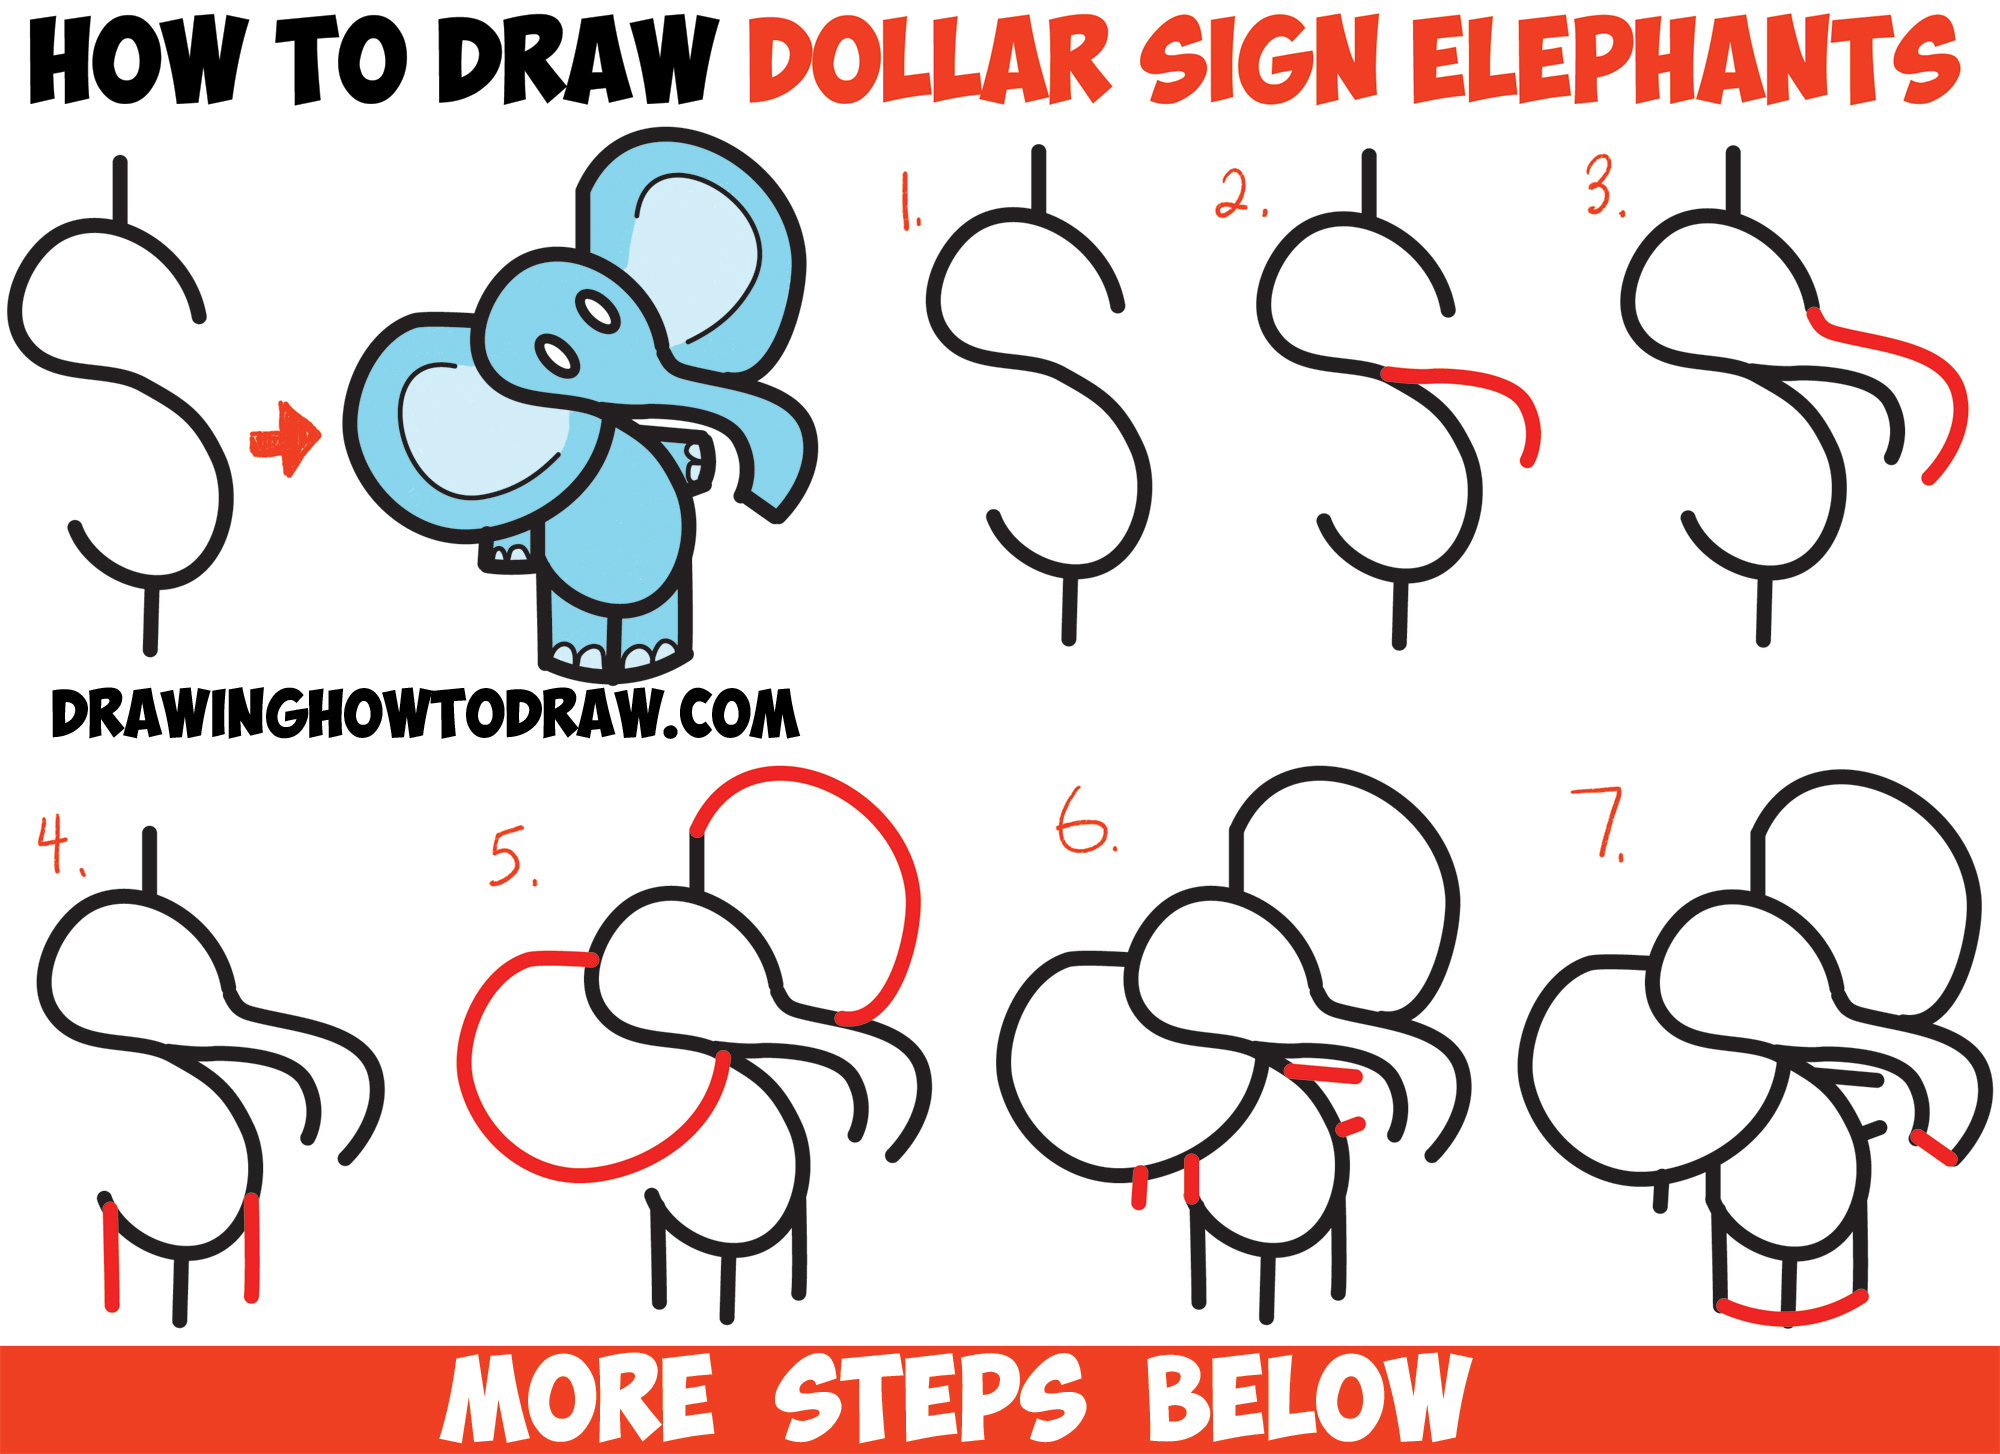 How to Draw Cartoon Elephant from the Dollar Sign Easy